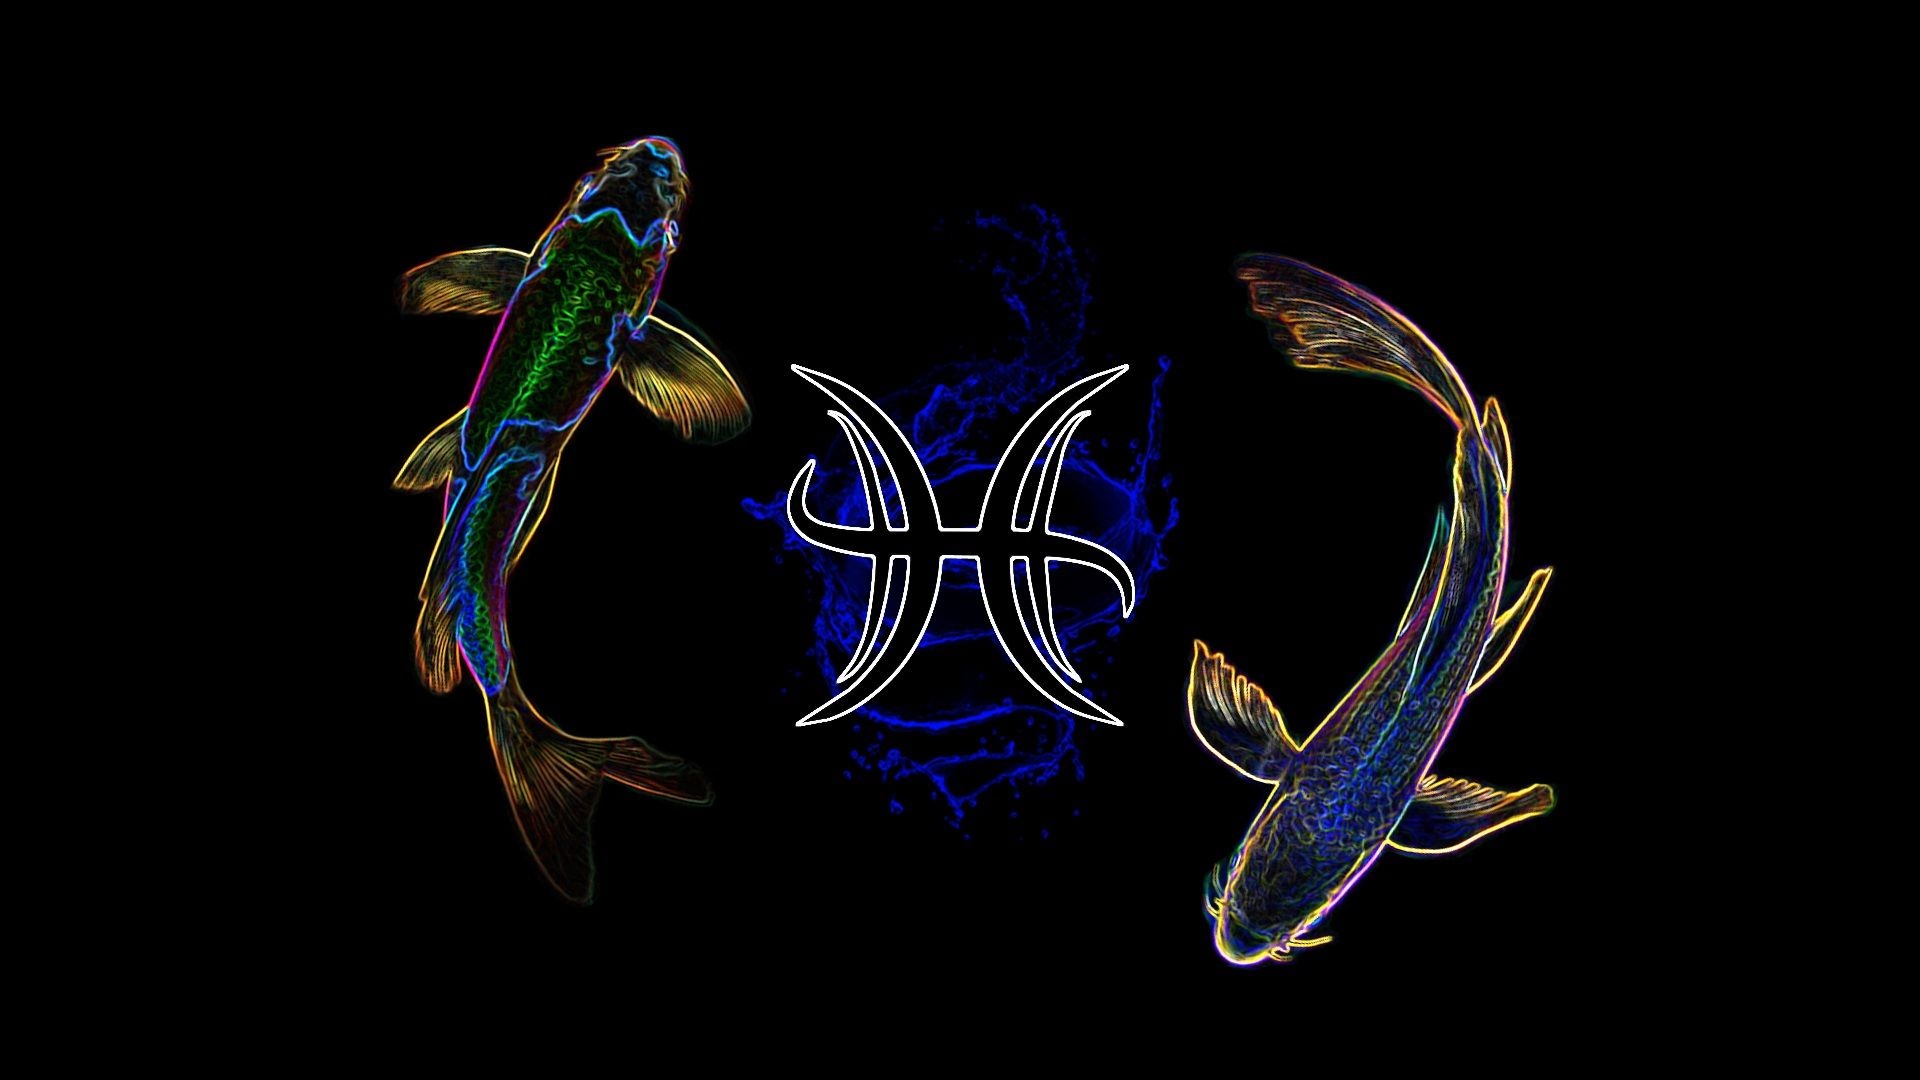 Pisces Zodiac Sign, Free wallpapers, Zodiac sign backgrounds, Personal expression, 1920x1080 Full HD Desktop